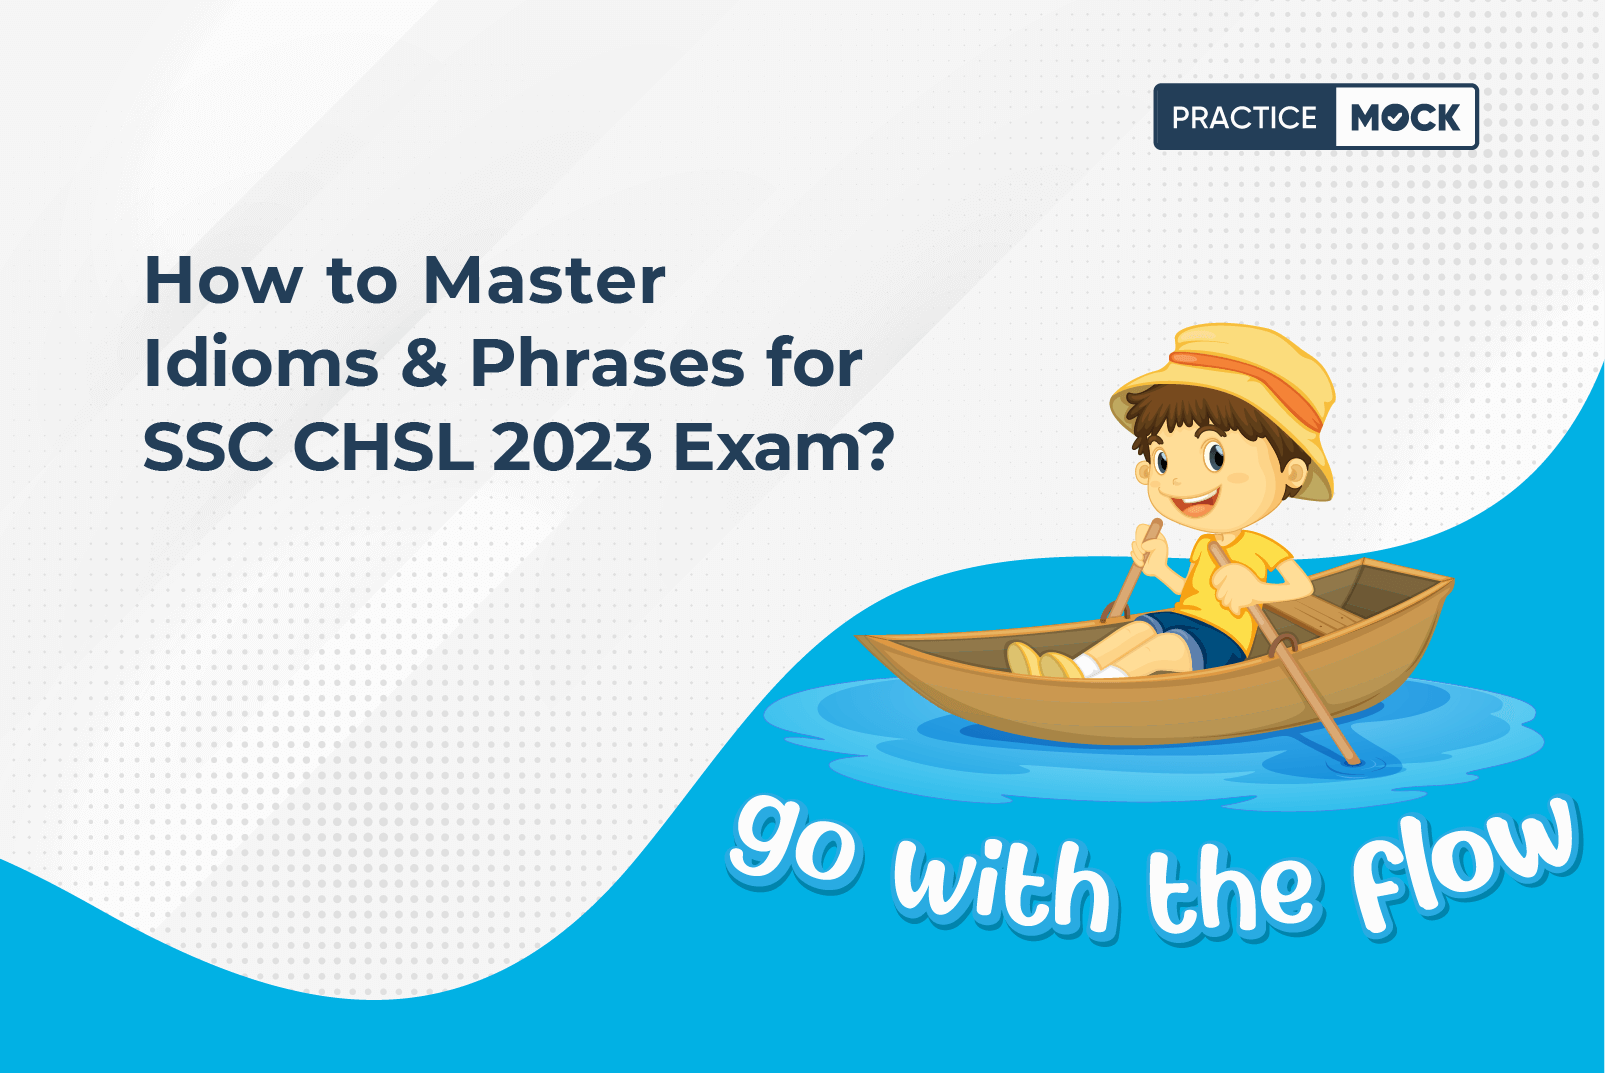 How to Master Idioms & Phrases for SSC CHSL 2023 Exam? - PracticeMock Blog